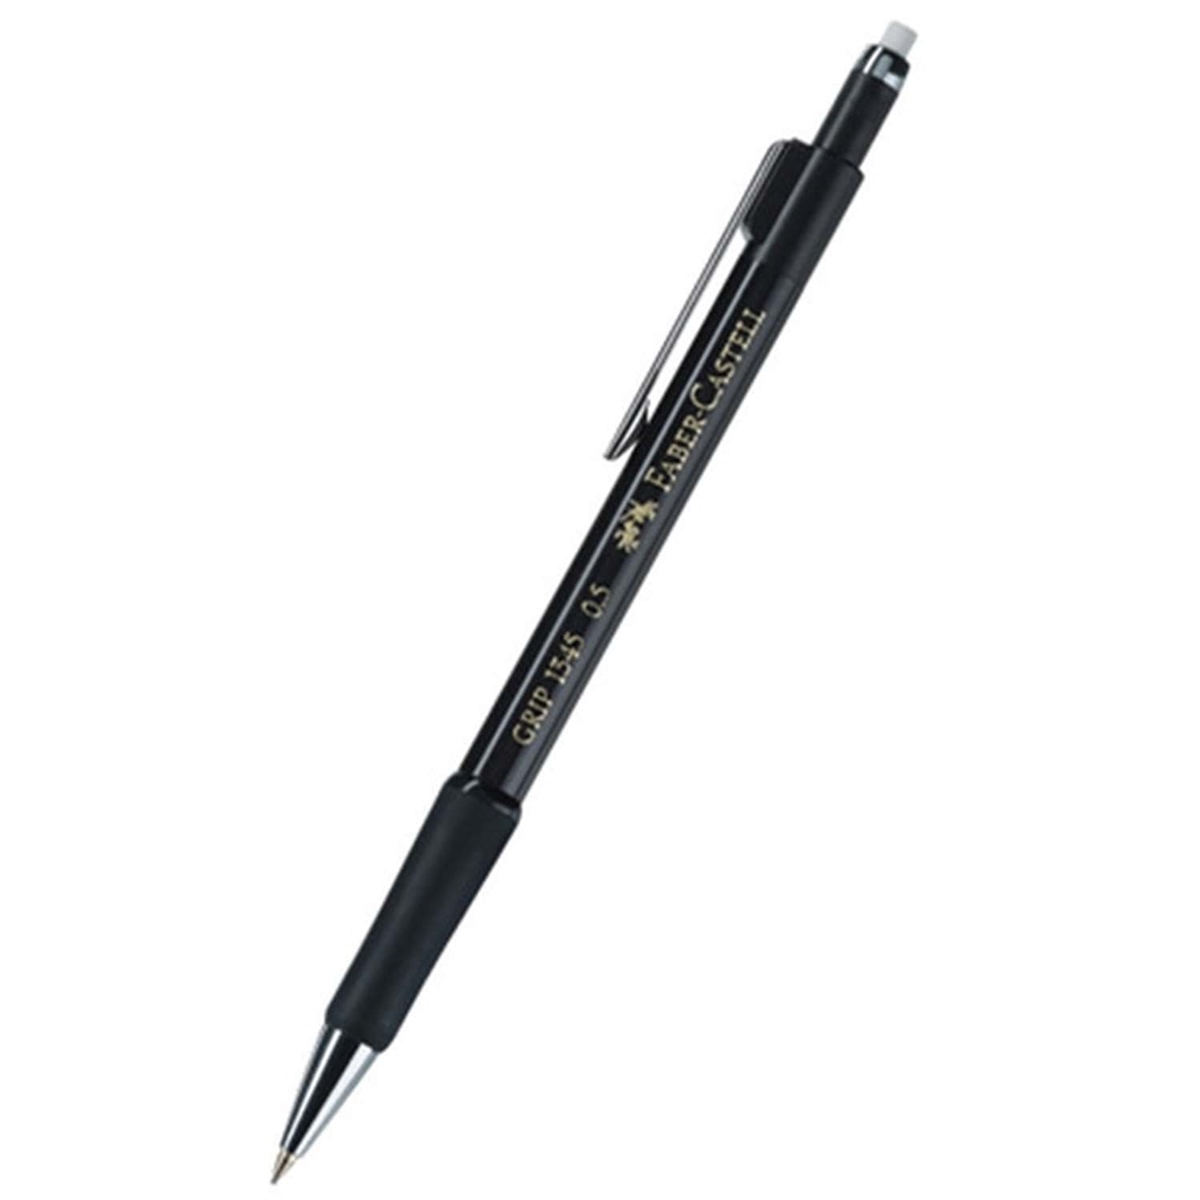 Paper and Digital: Review Faber Castell Grip 1345 mechanical pencil